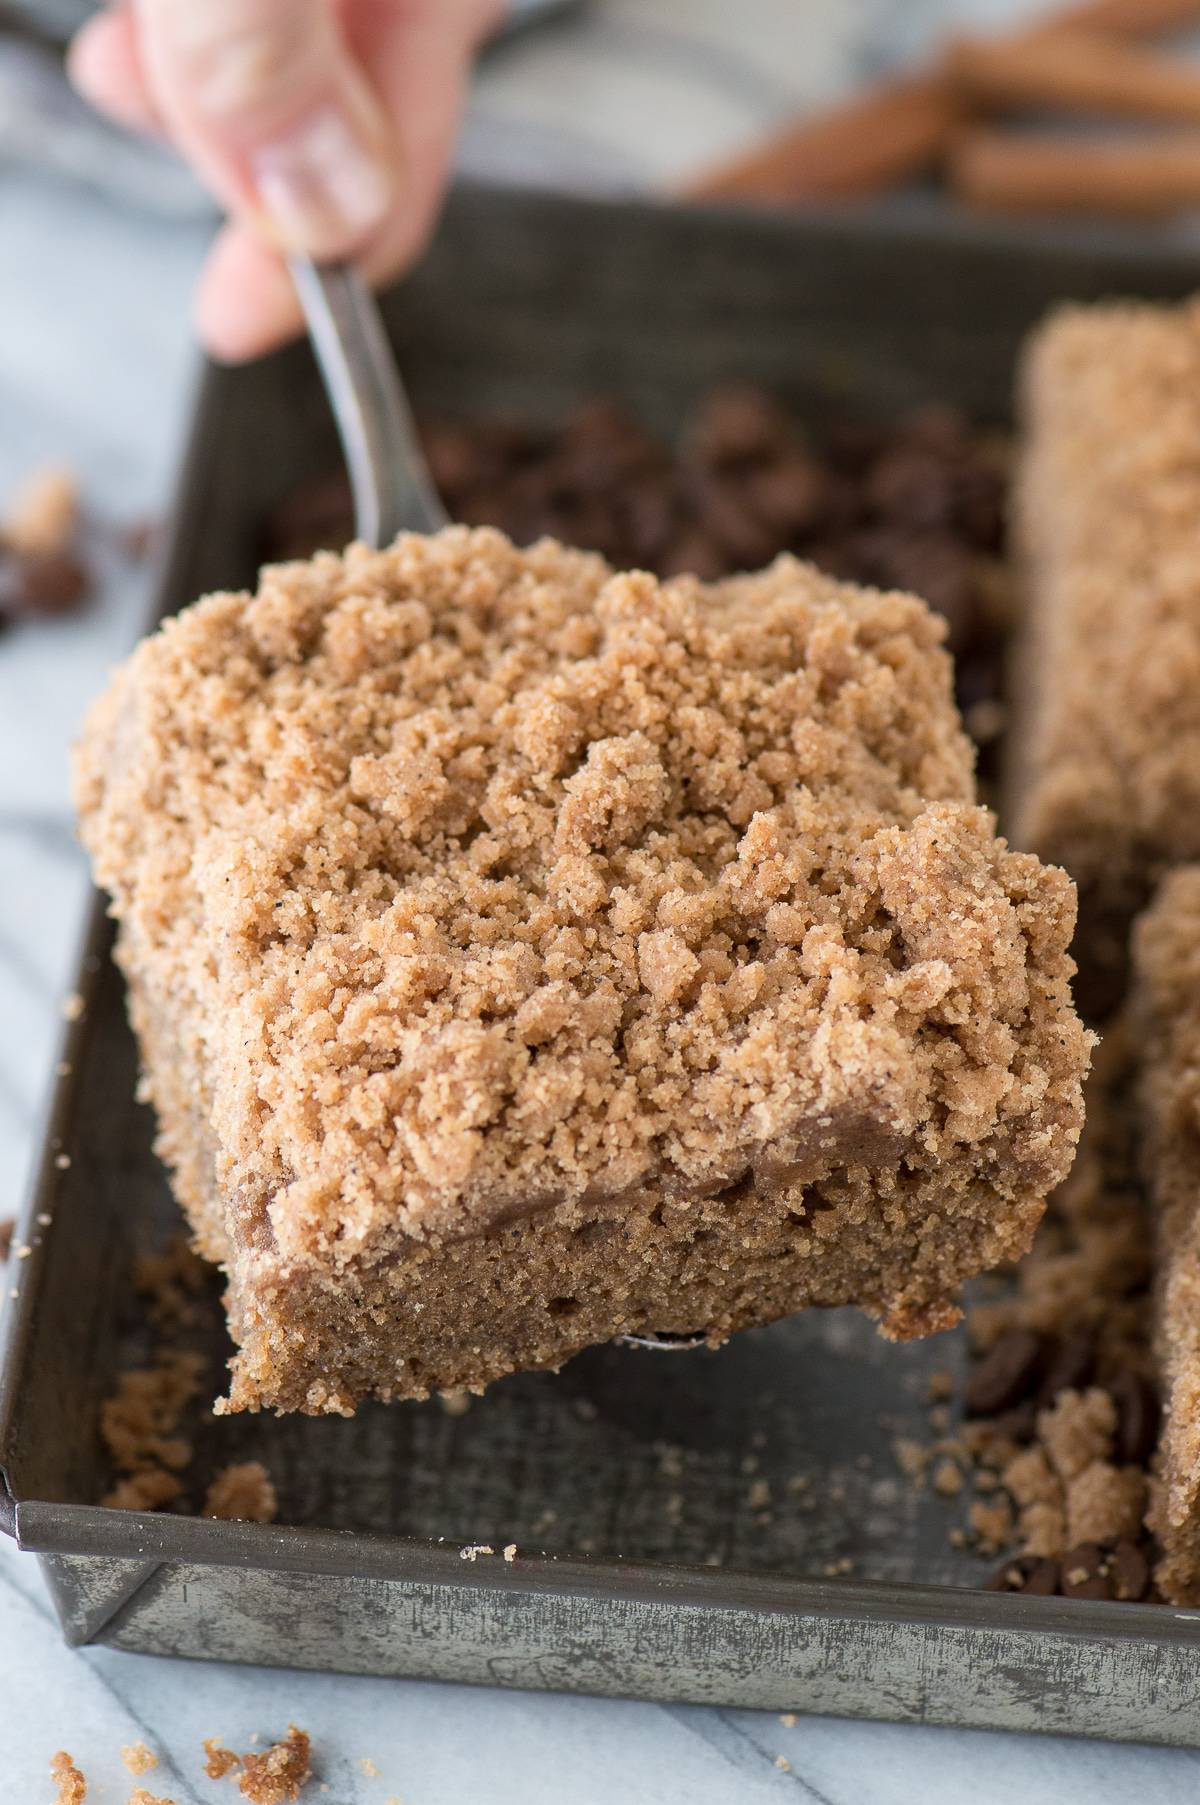 Our favorite espresso coffee cake with mile high crumb! With brewed espresso and ground espresso in the batter, this coffee cake actually tastes like coffee!